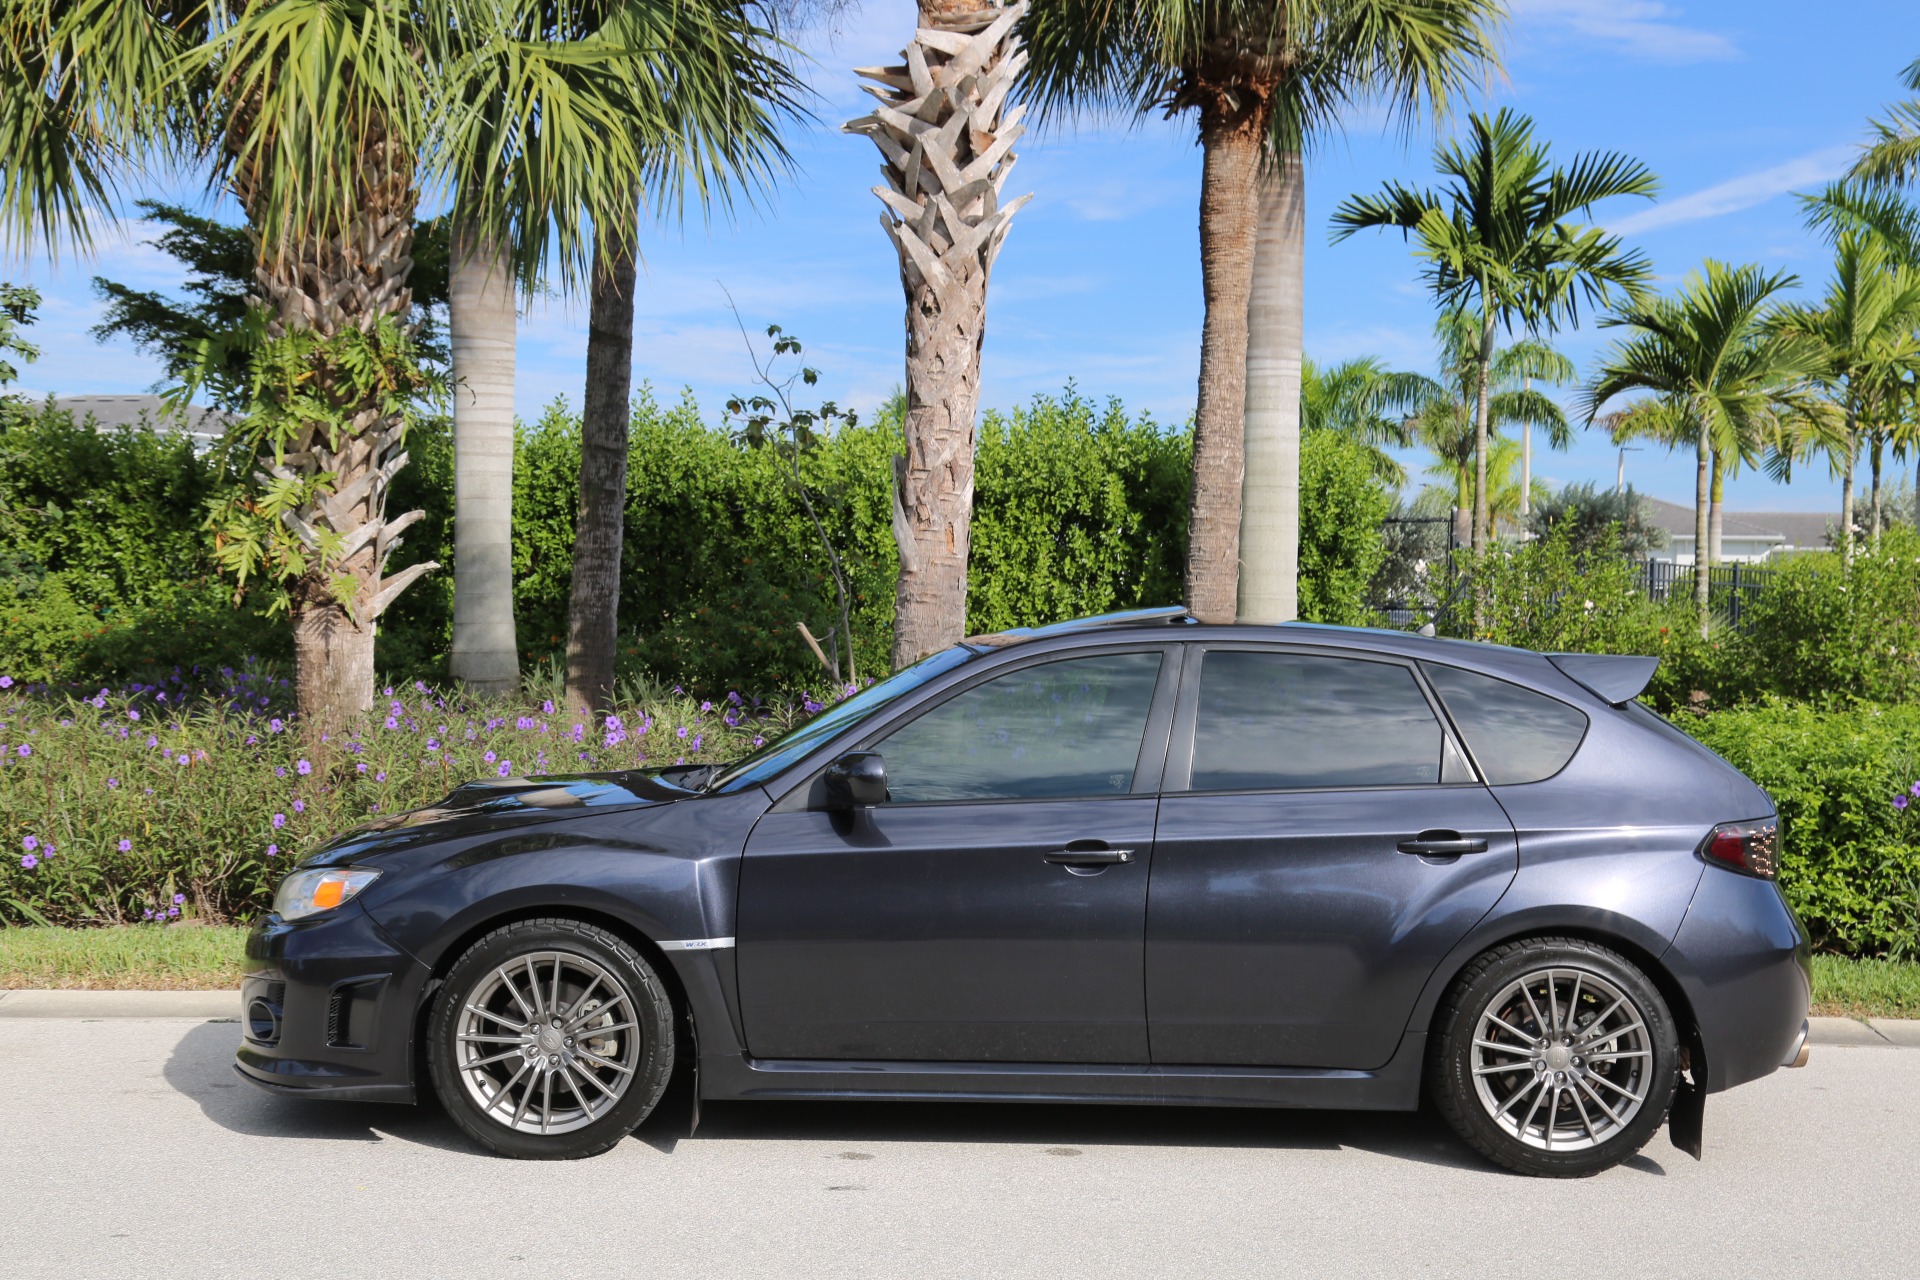 Used 2013 Subaru Impreza WRX Premium Hatch for sale Sold at Muscle Cars for Sale Inc. in Fort Myers FL 33912 4